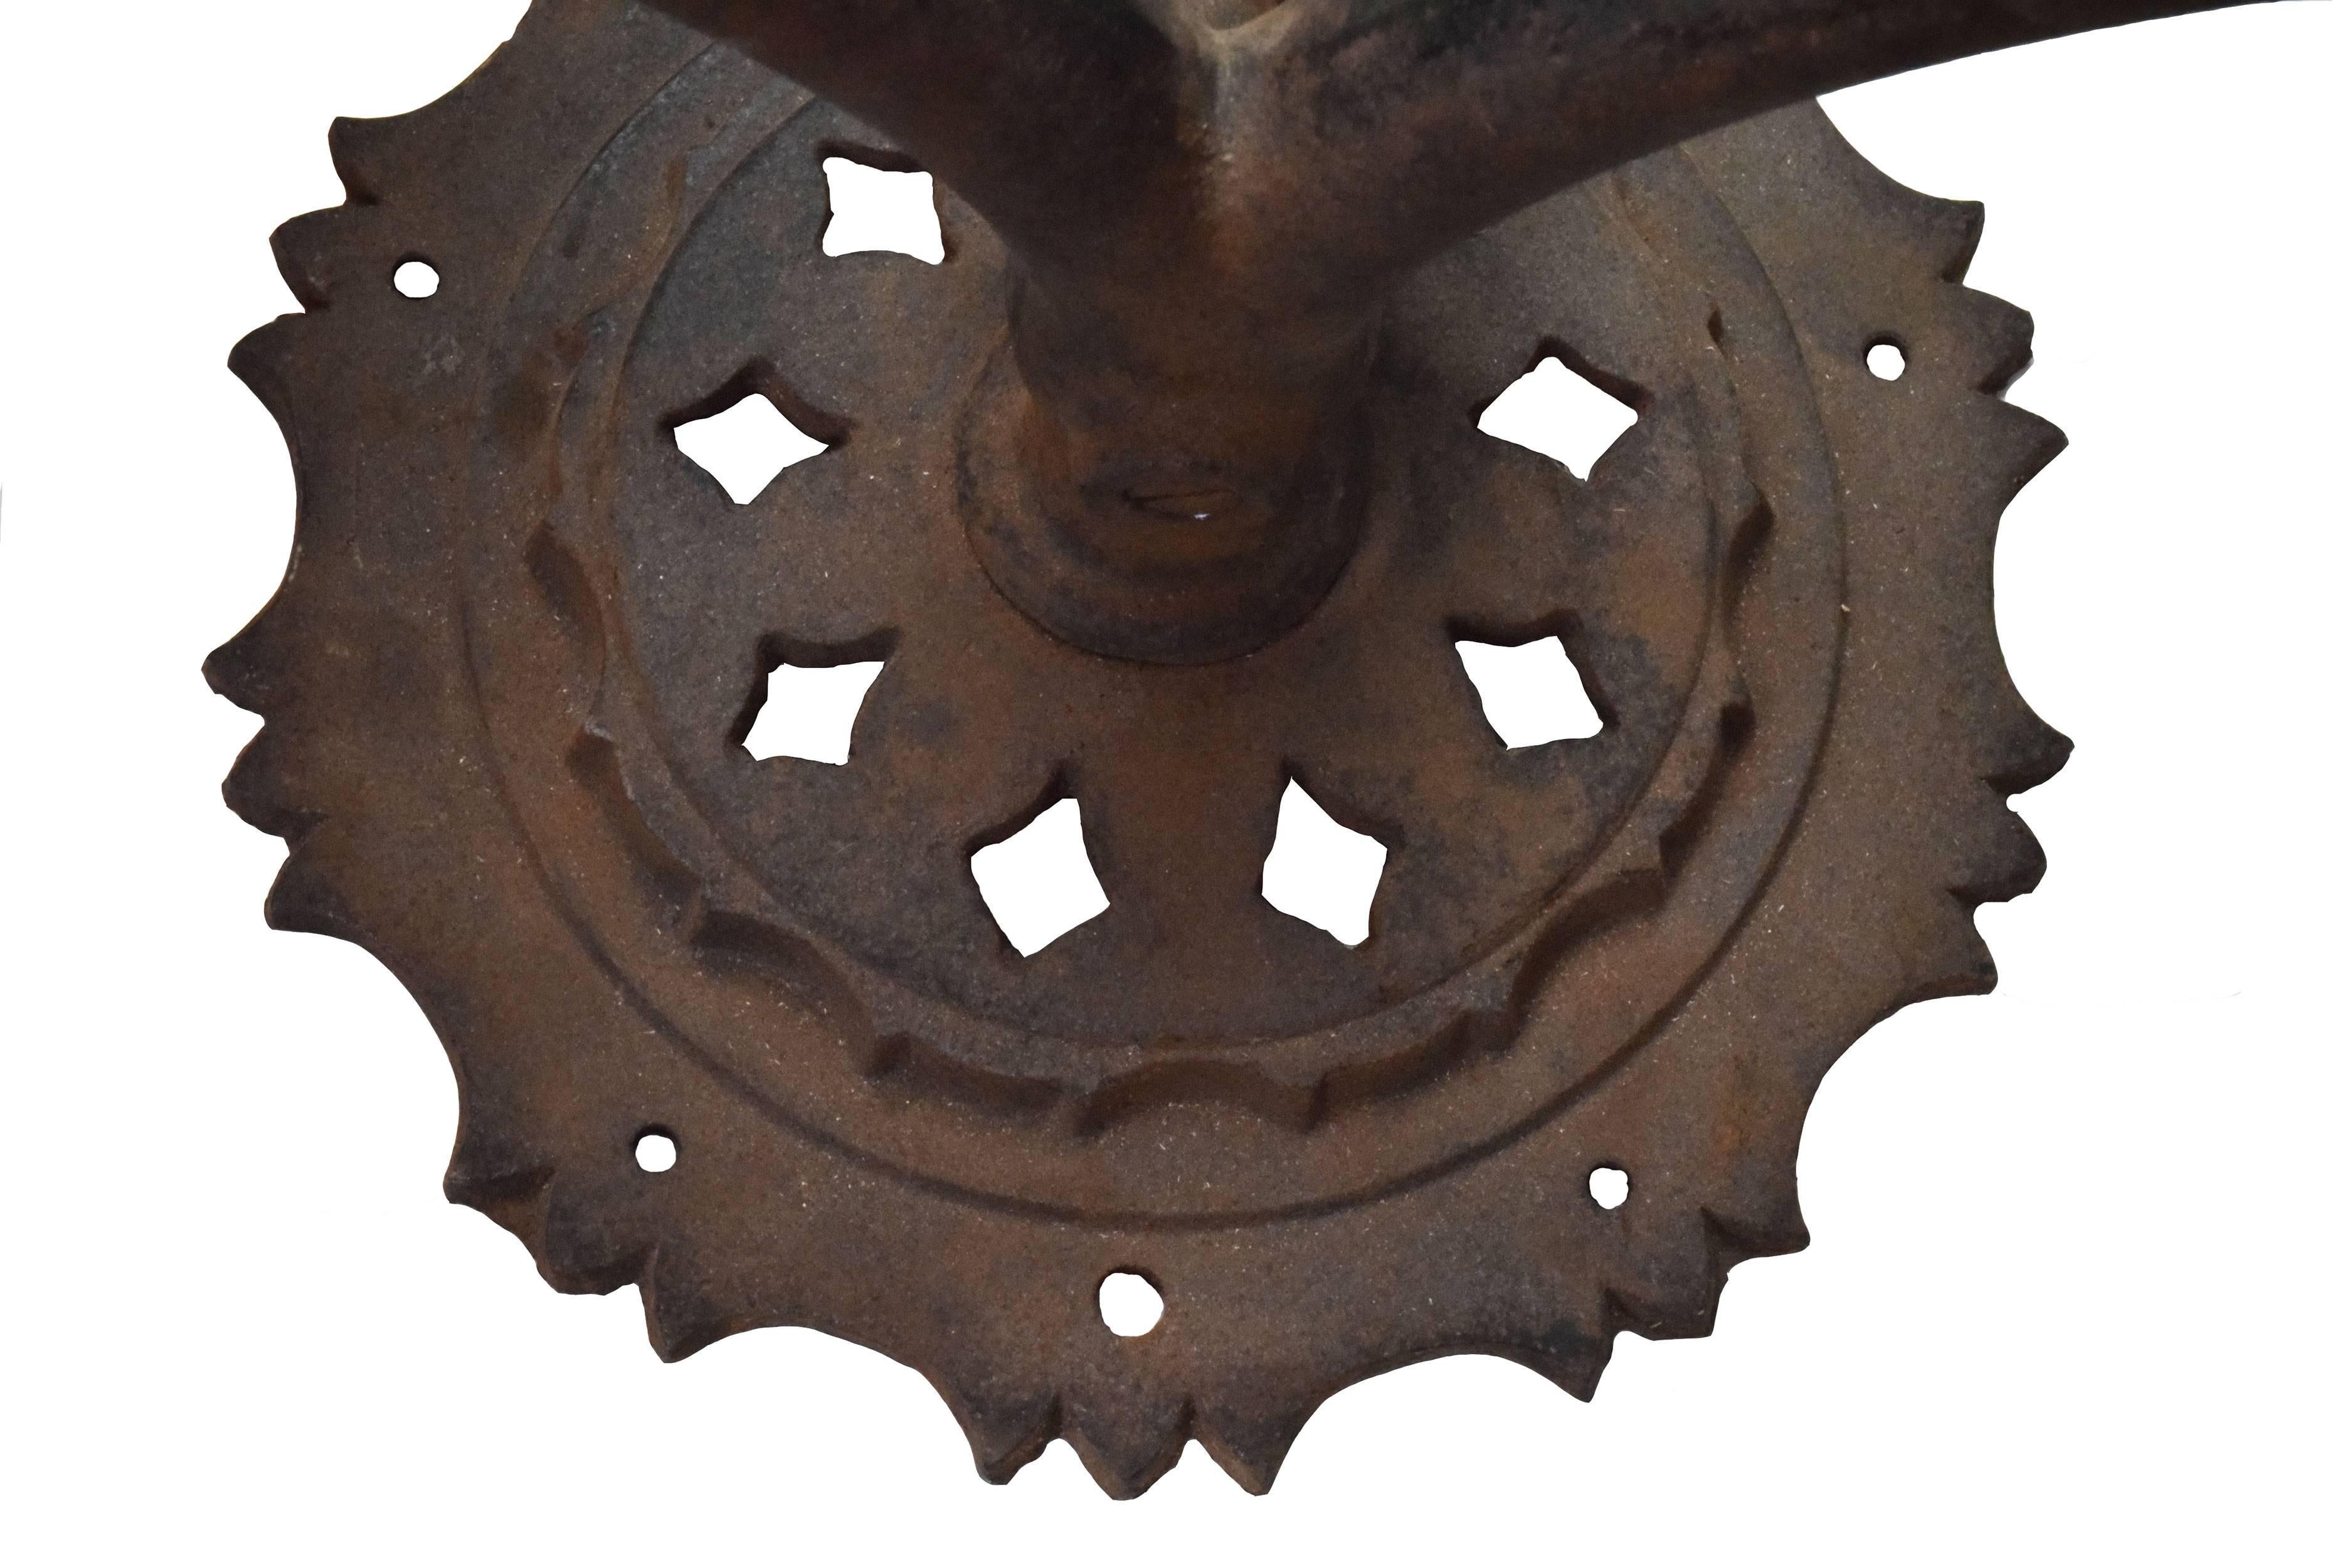 This 1920s iron sconce with prongs will make a statement in your home! A pair of these sconces would look perfect flanking a fireplace or doorway!

Finish: Original
Two medium sockets

We find that early antique lighting was designed as objects of